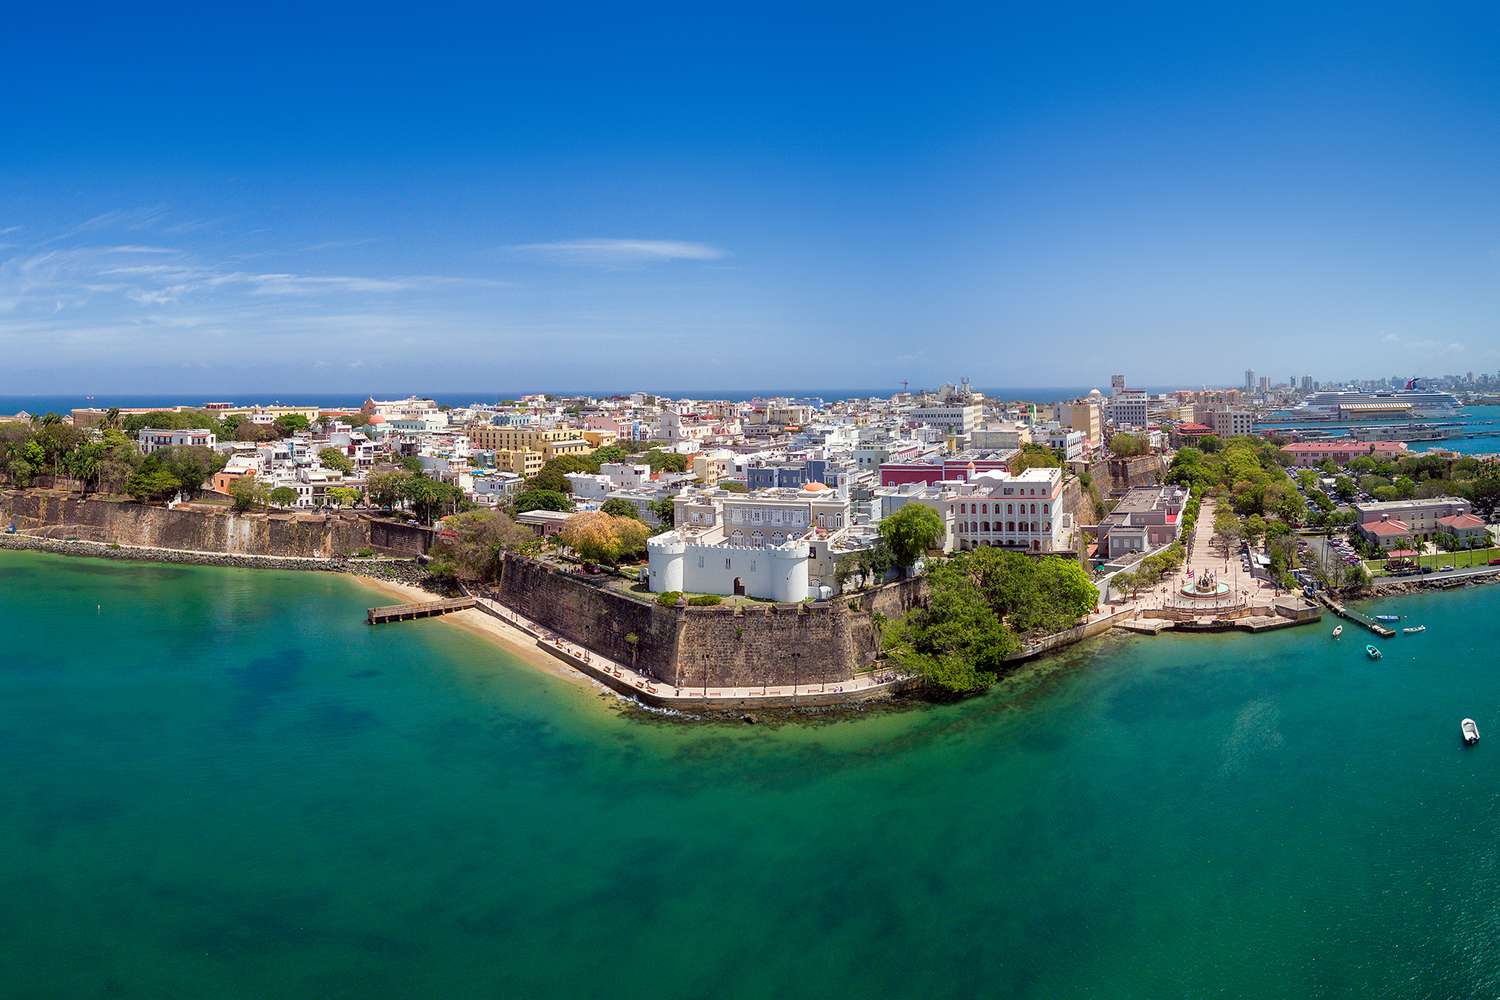 JetBlue Launches New Flights to Puerto Rico, Bonaire, and More in Latest Expansion